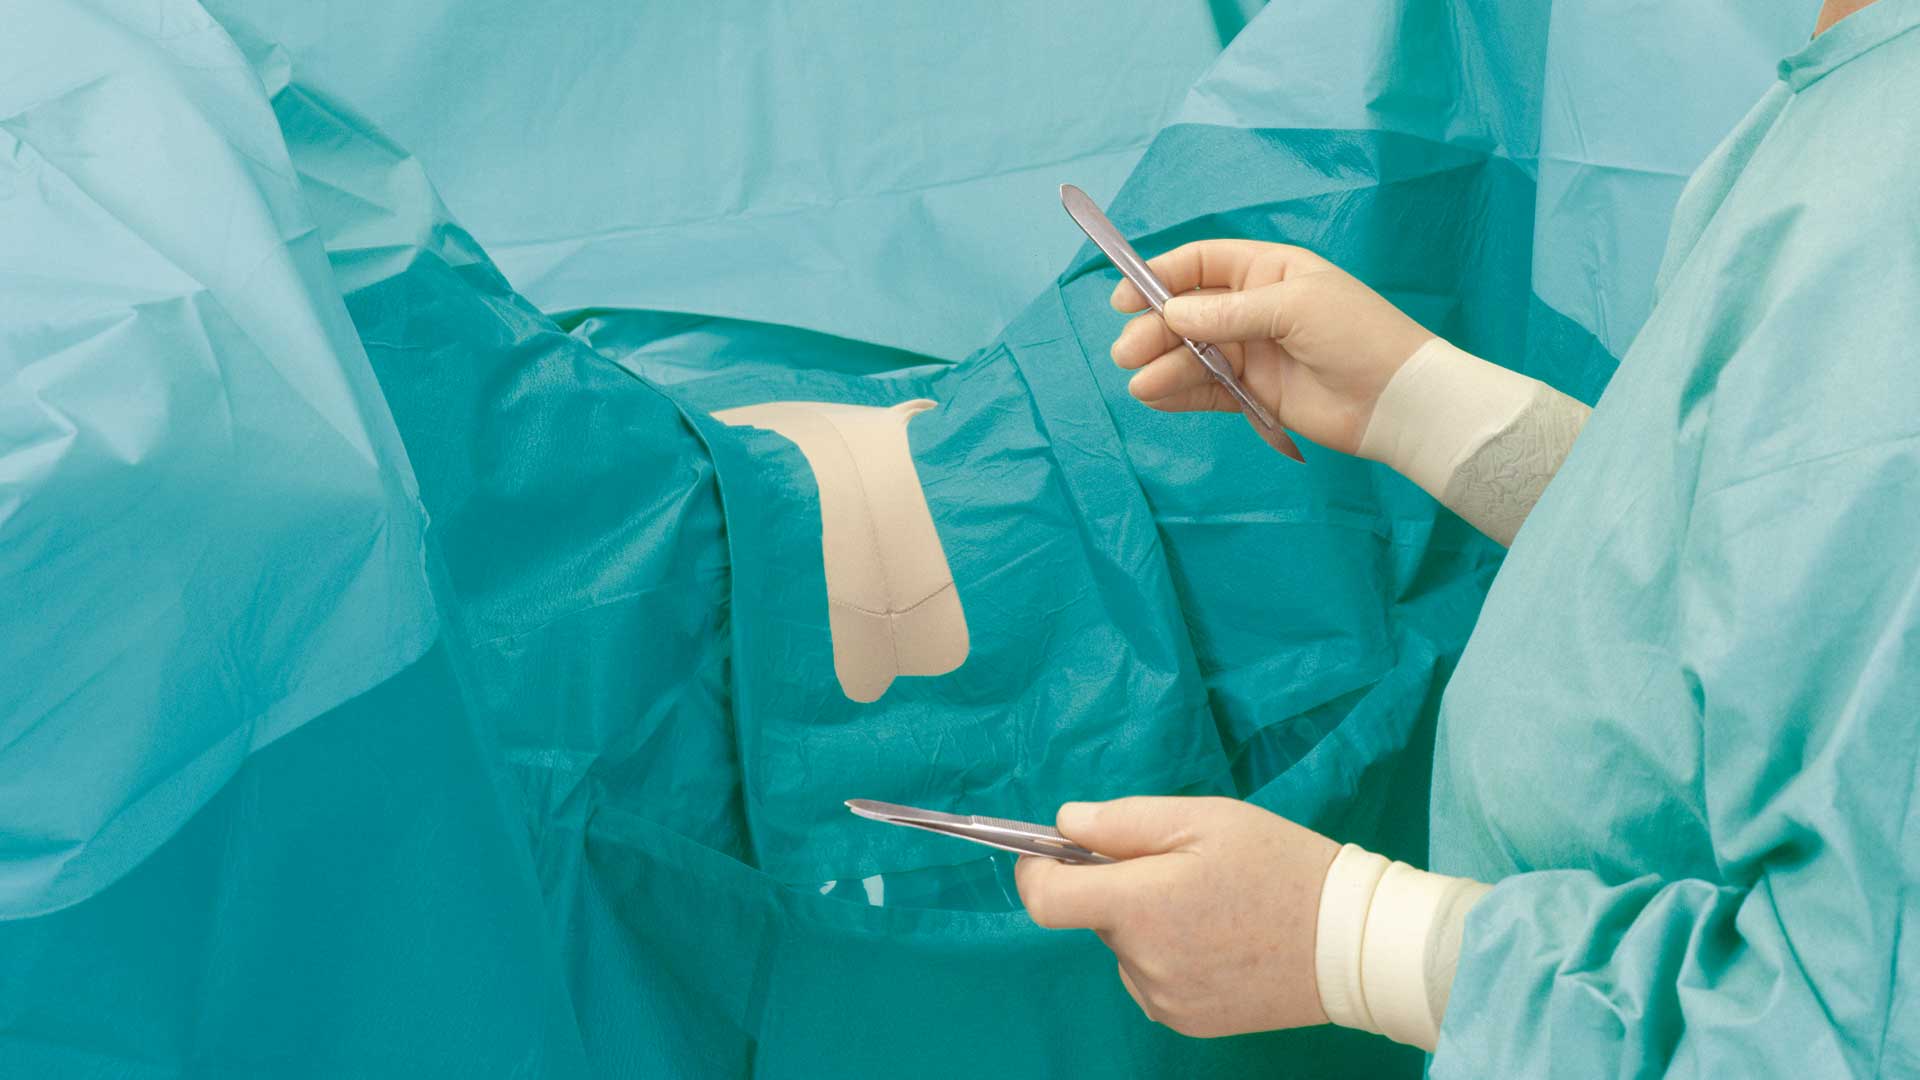 a surgeon using a BARRIER gynaecology drape during an operations